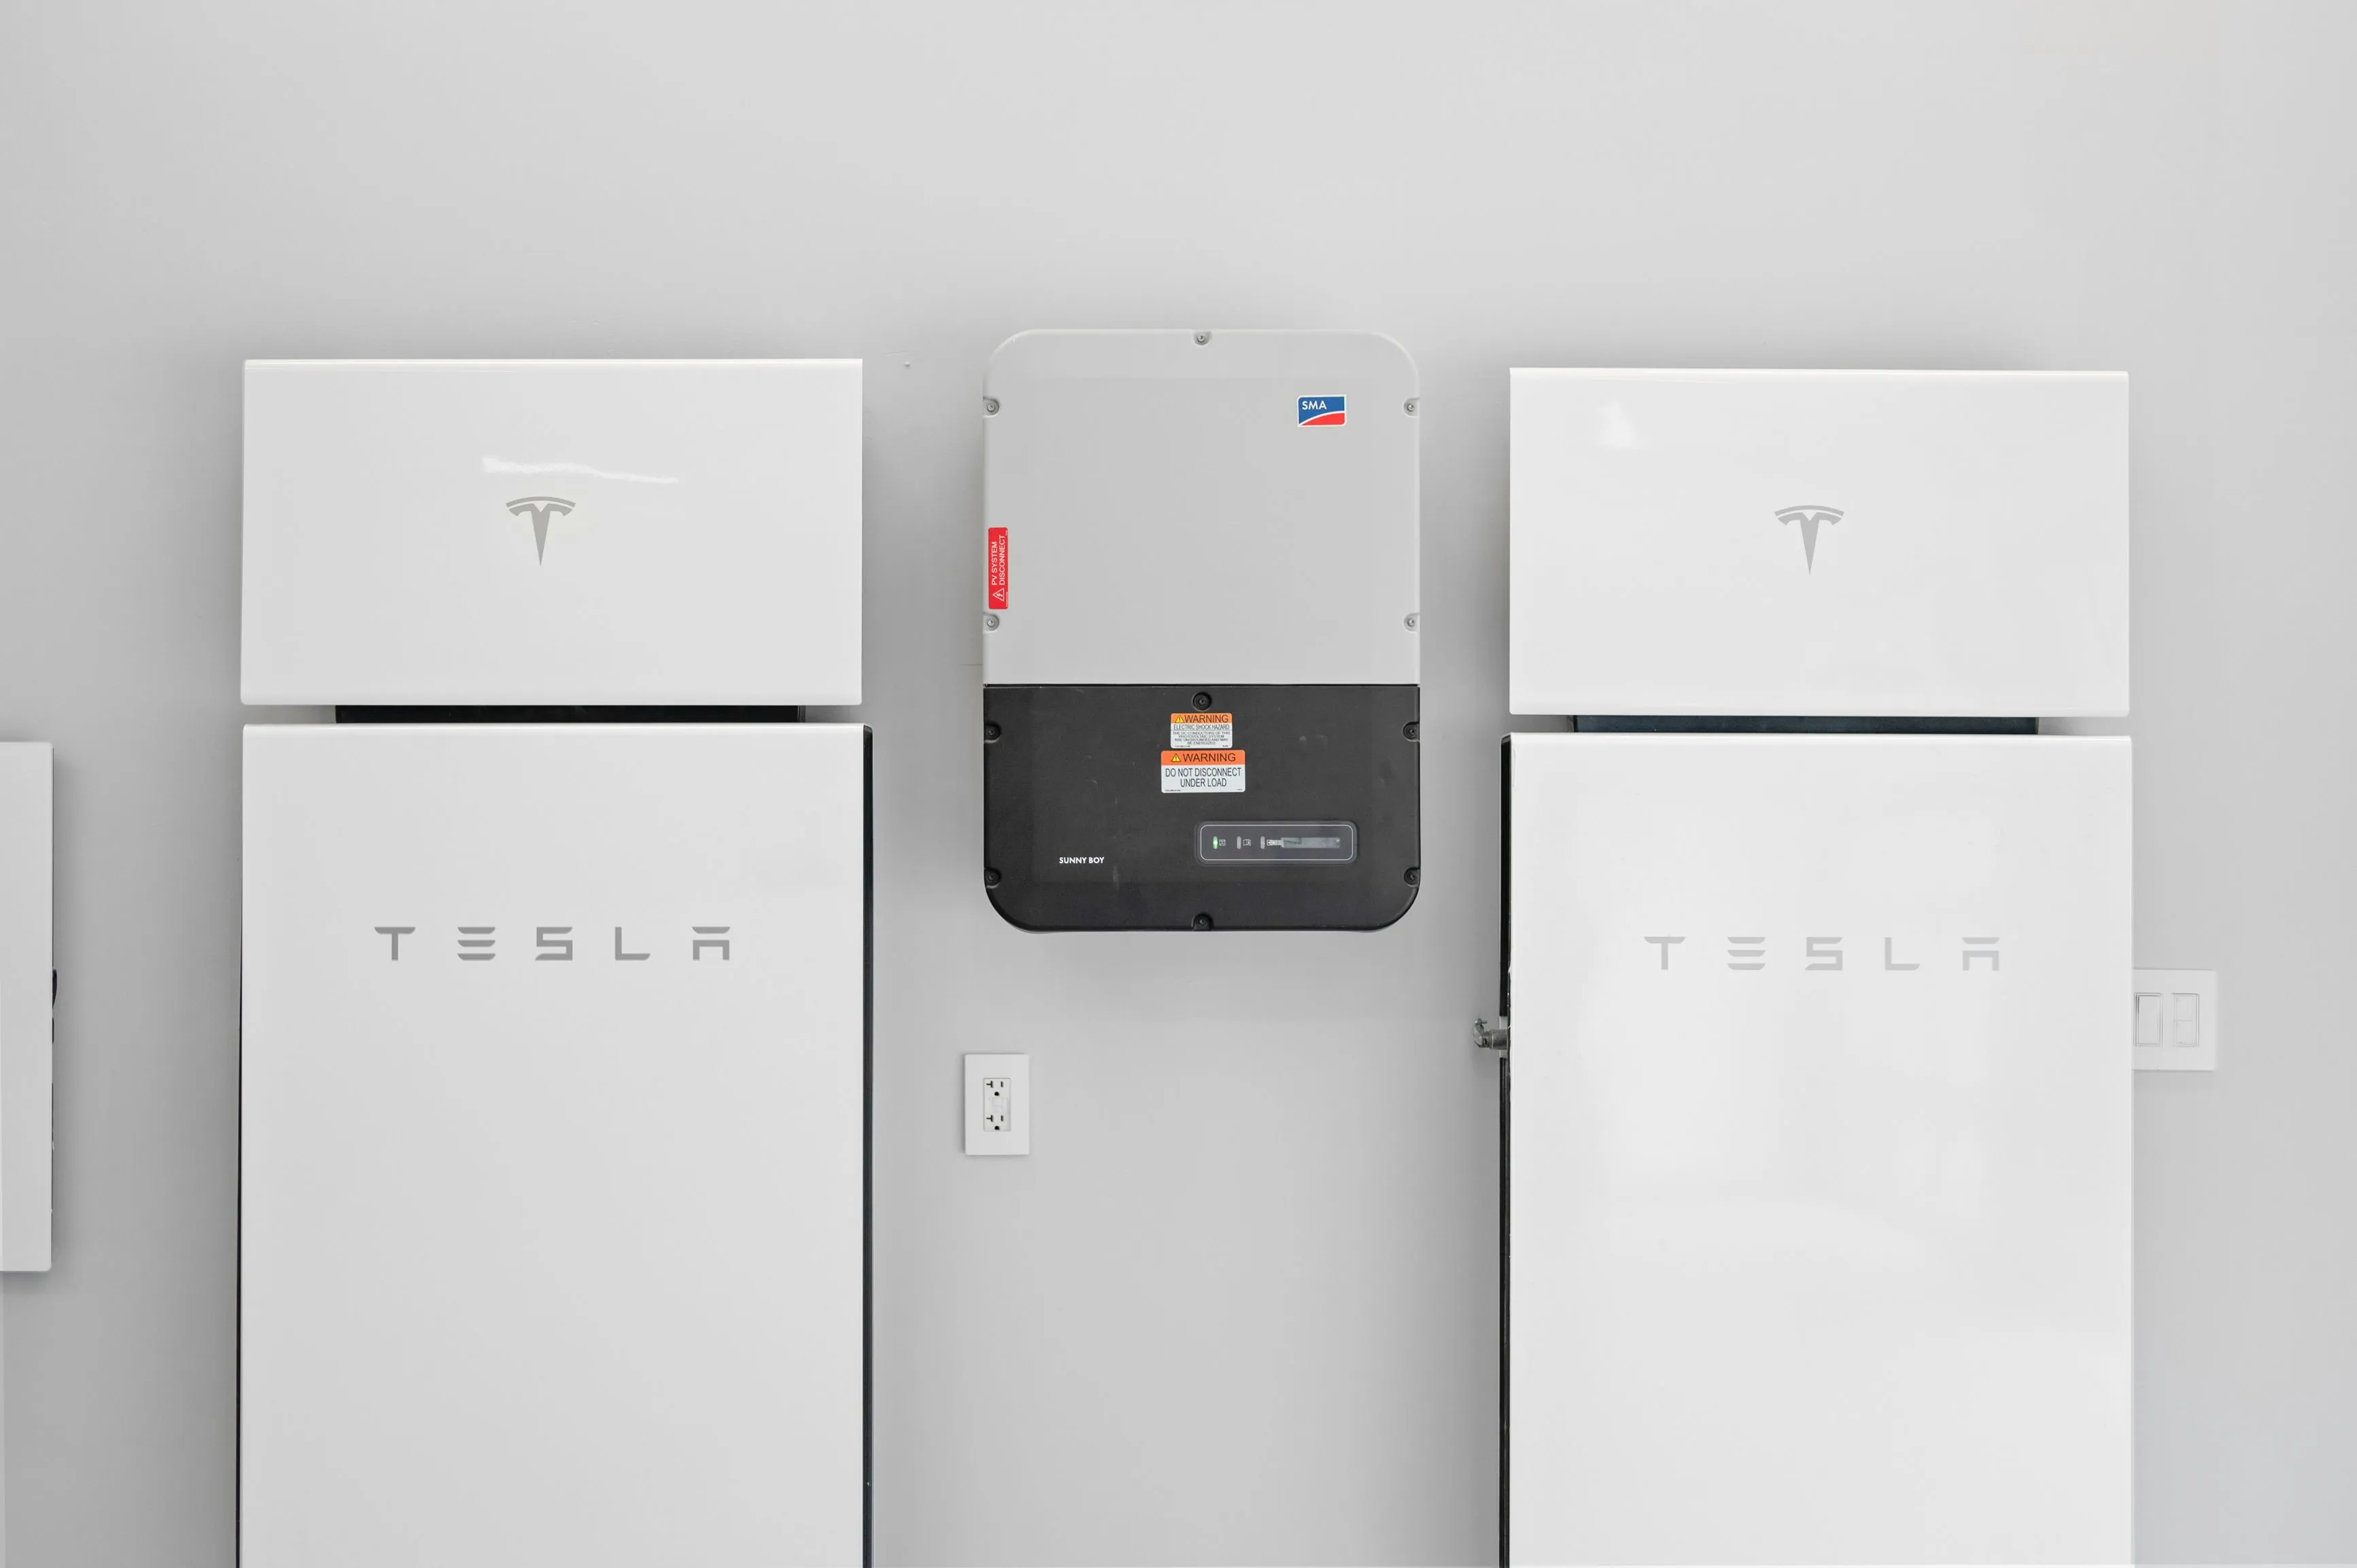 Wall-mounted Tesla Powerwalls and Solar Inverter in a clean, organized home energy setup.